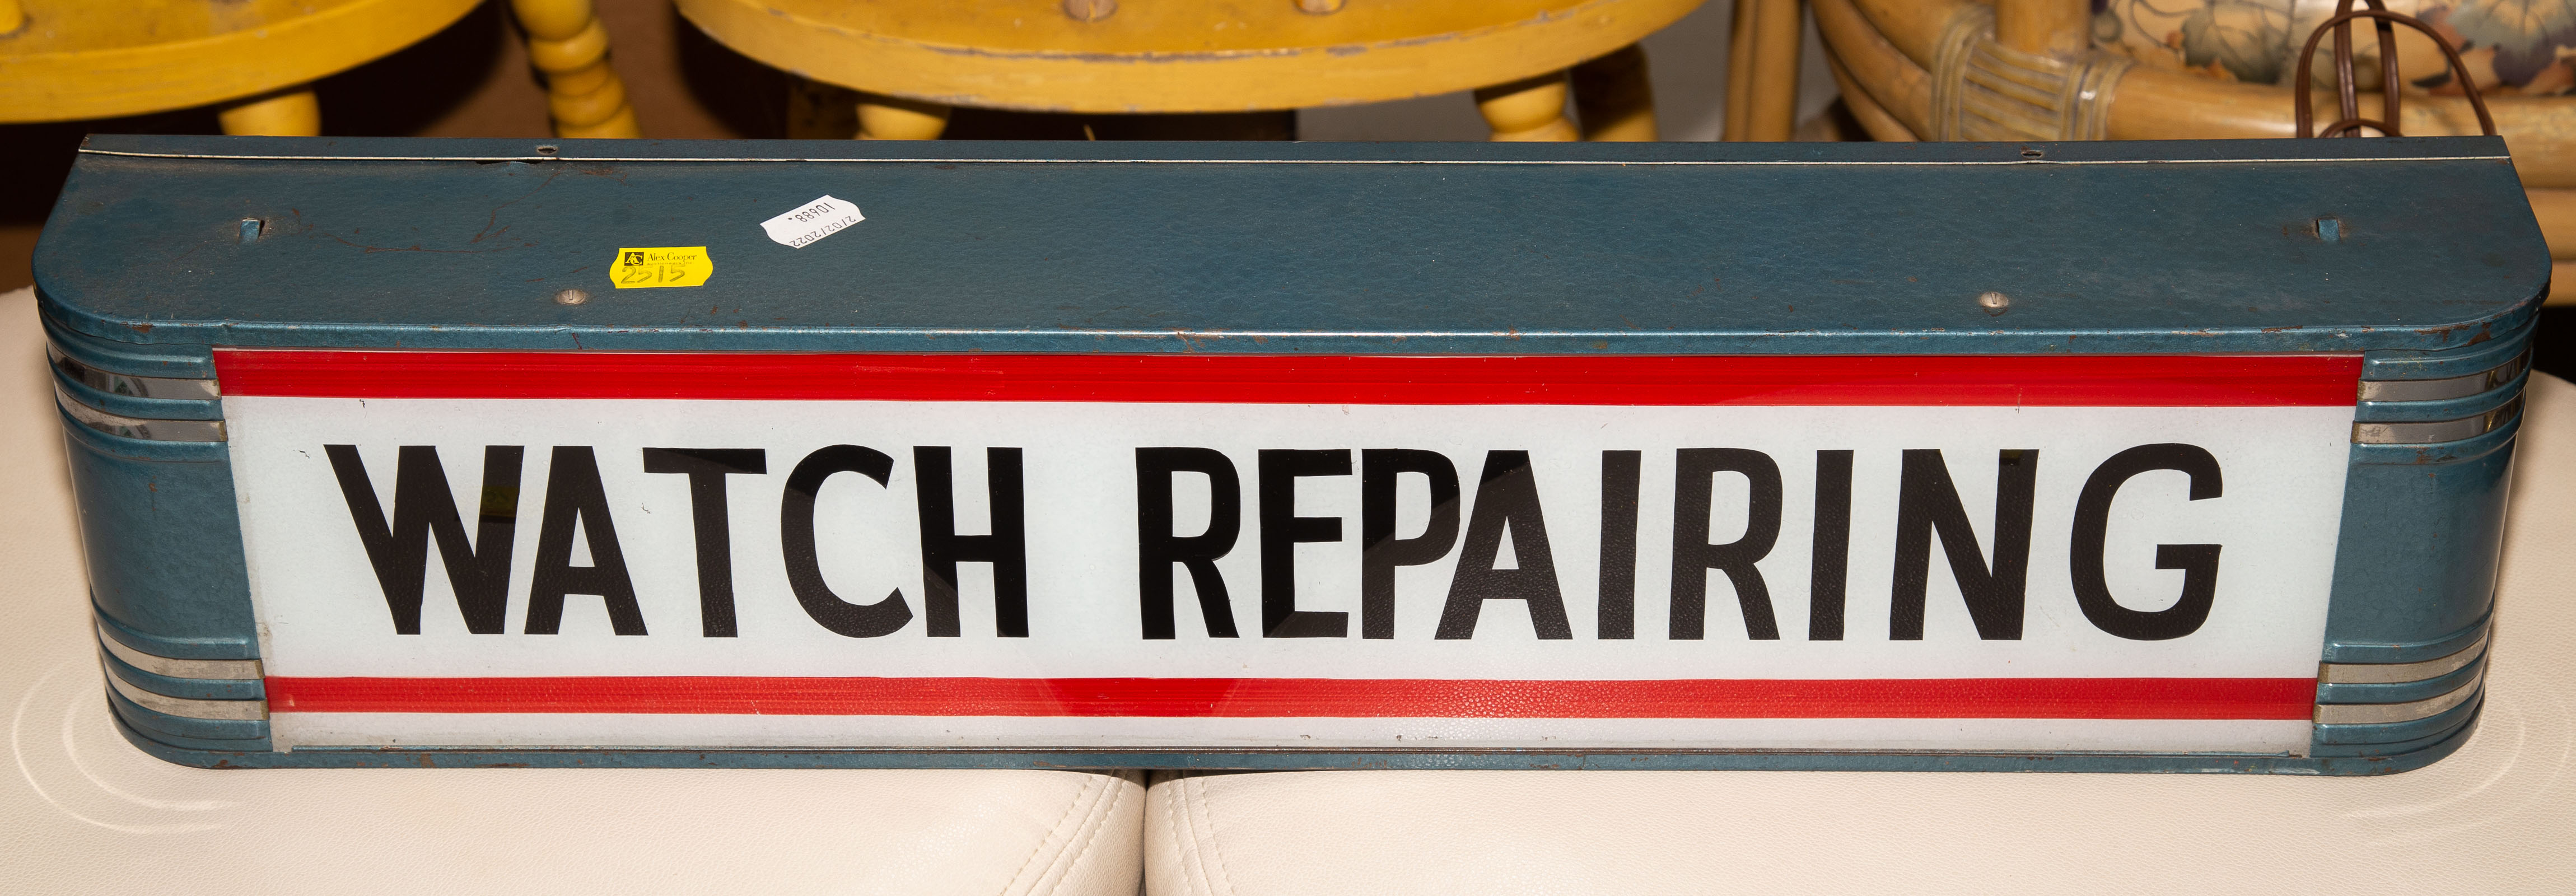 VINTAGE LIGHT UP WATCH REPAIR SIGN By